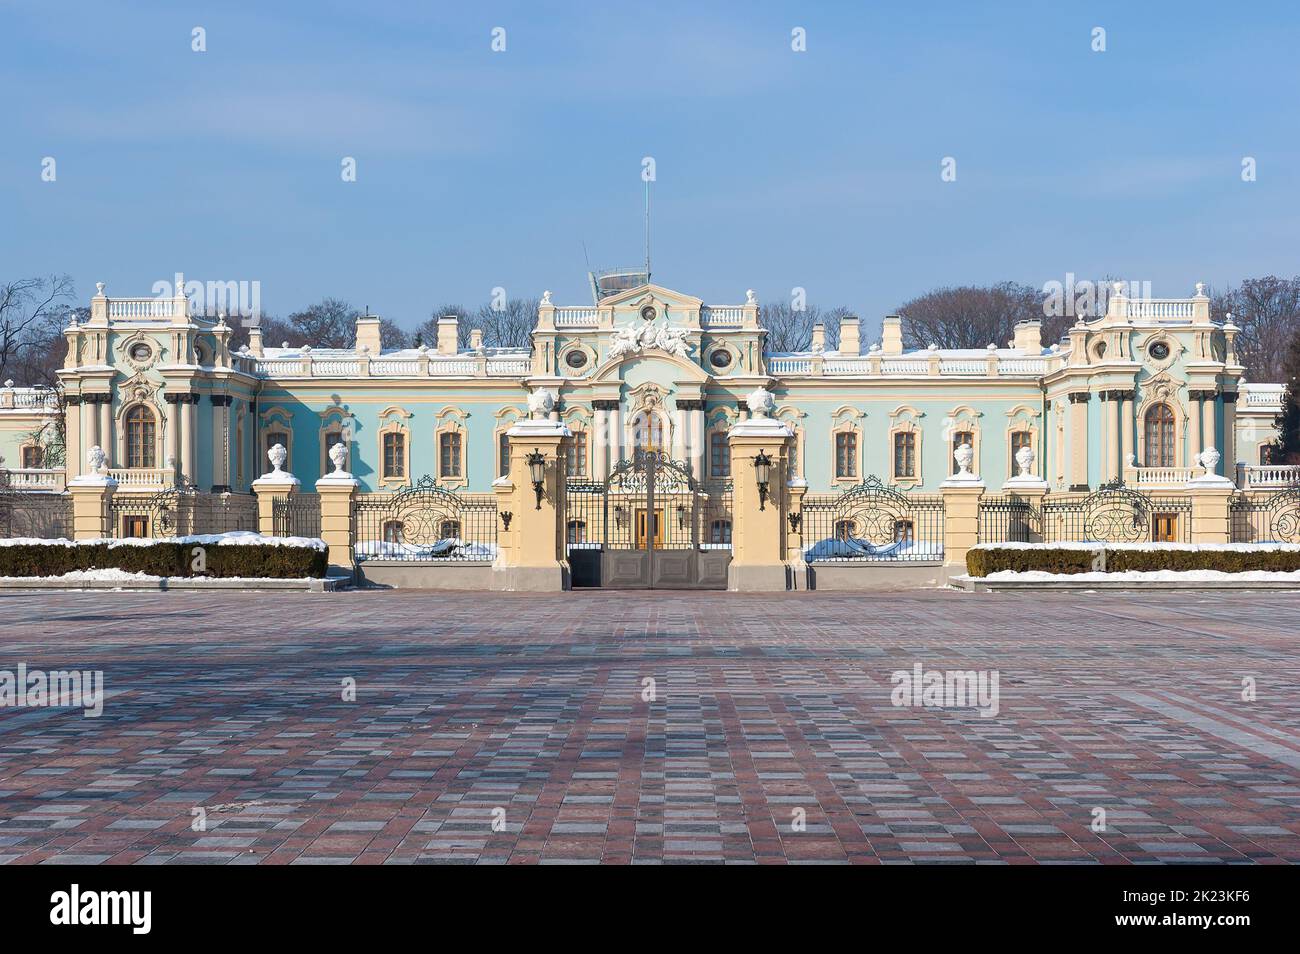 The Mariinsky palace, official ceremonial residence of the President of Ukraine, in Kiev, during winter with snow Stock Photo